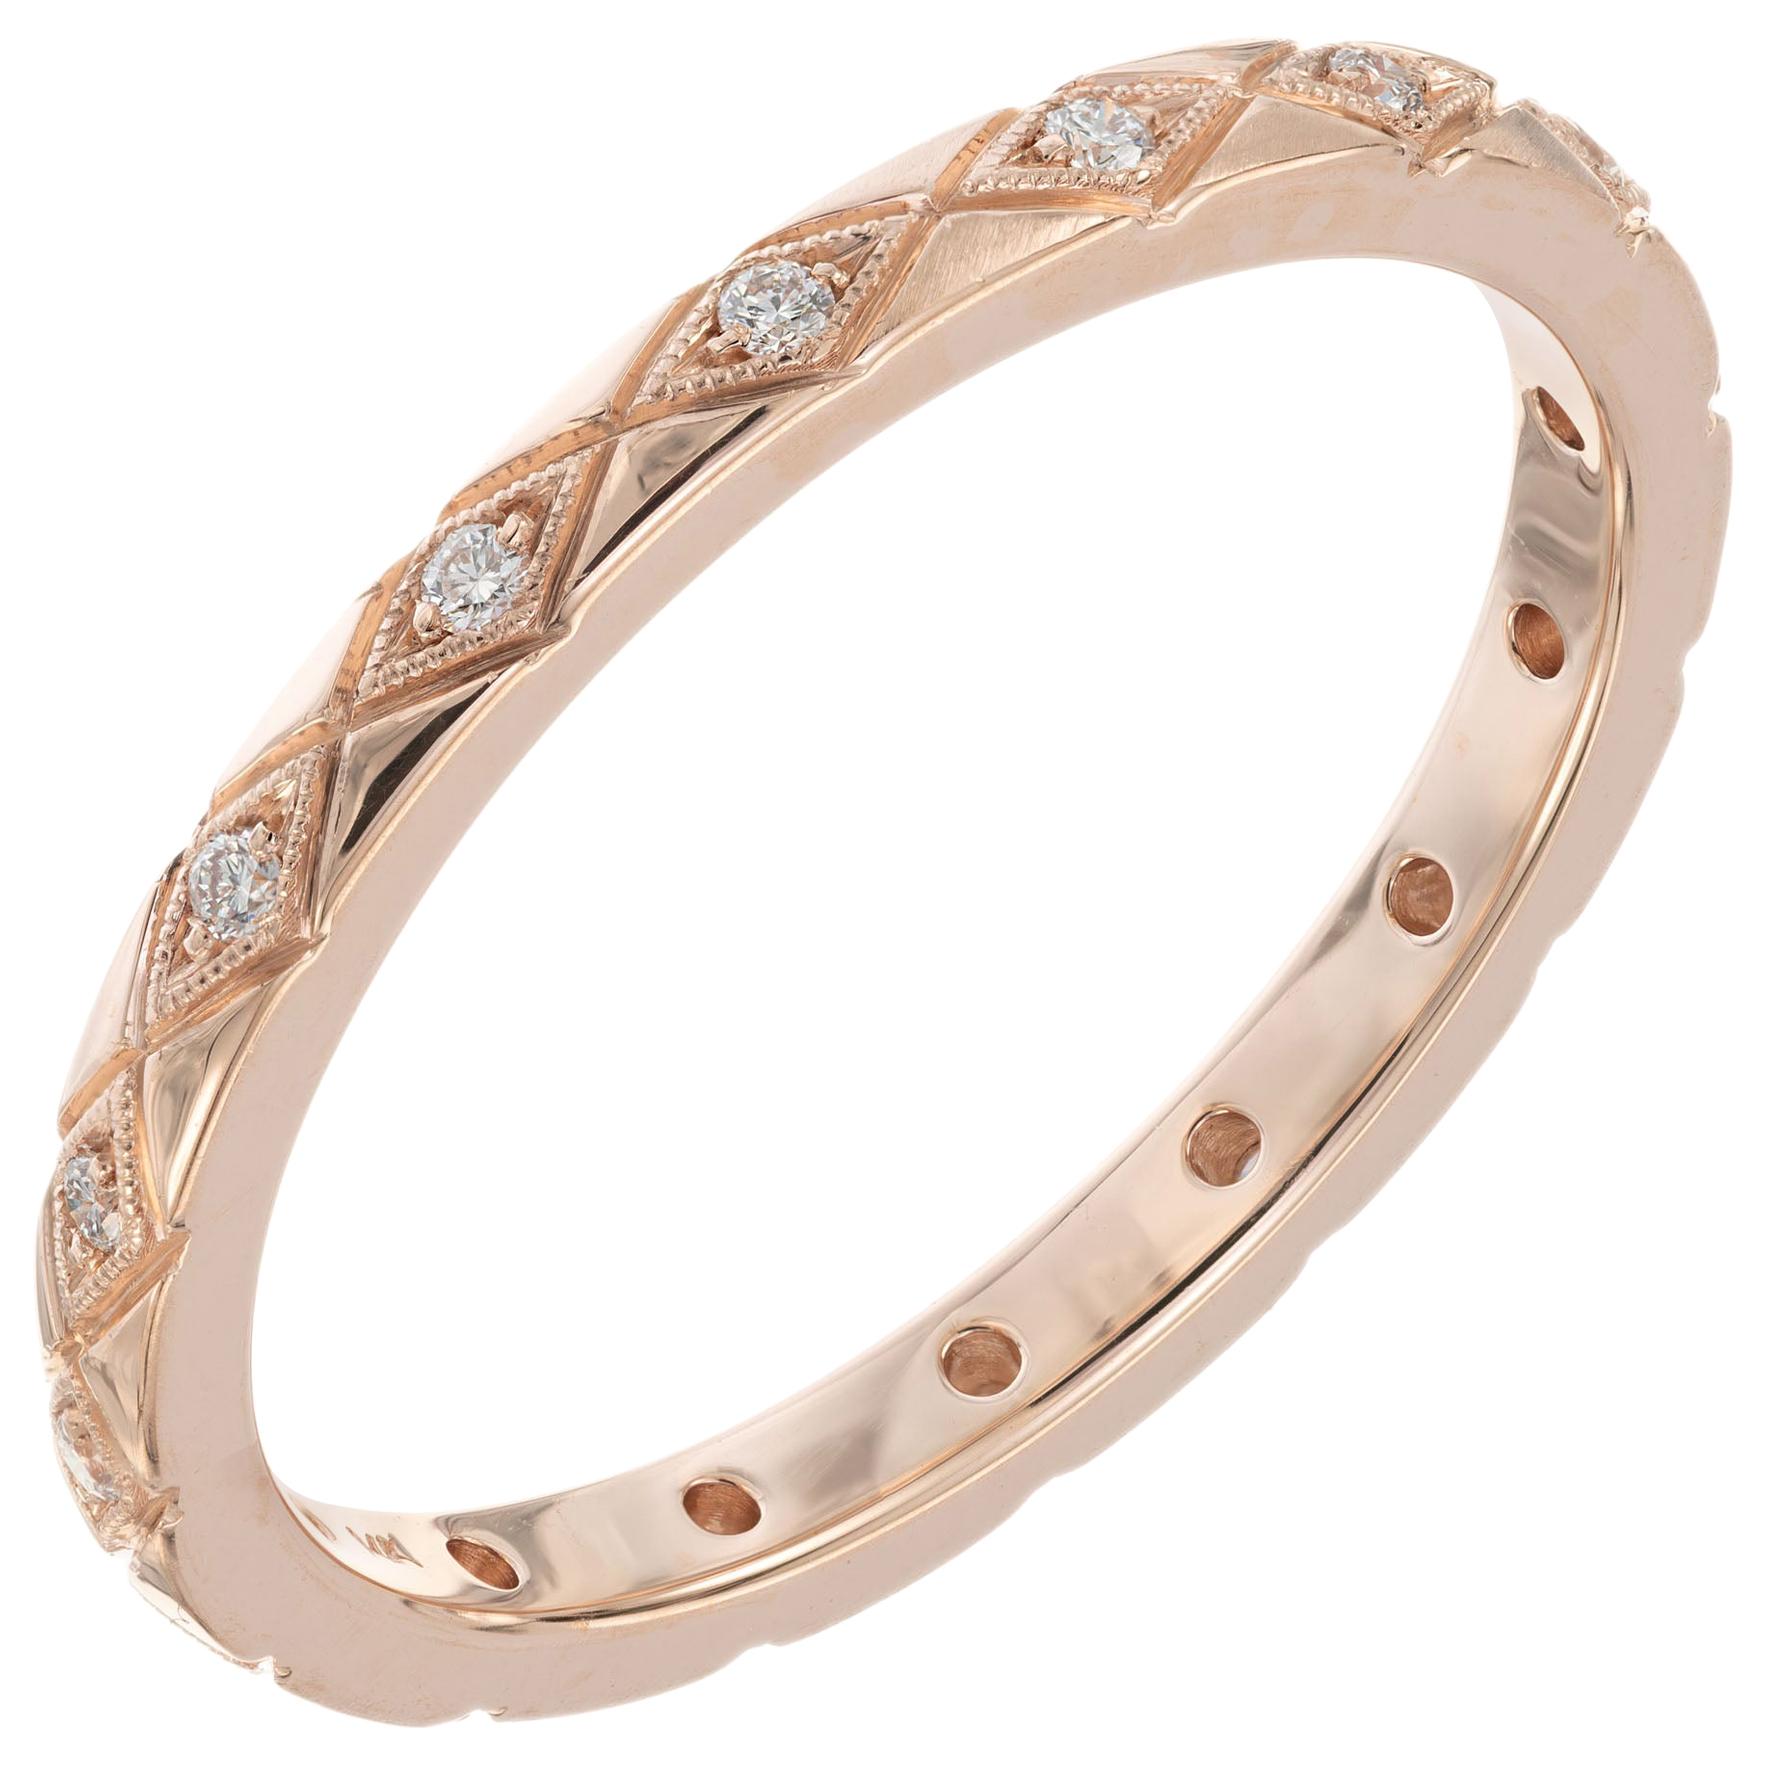 Peter Suchy .9 Carat Diamond Rose Gold Eternity Wedding Band Ring For Sale